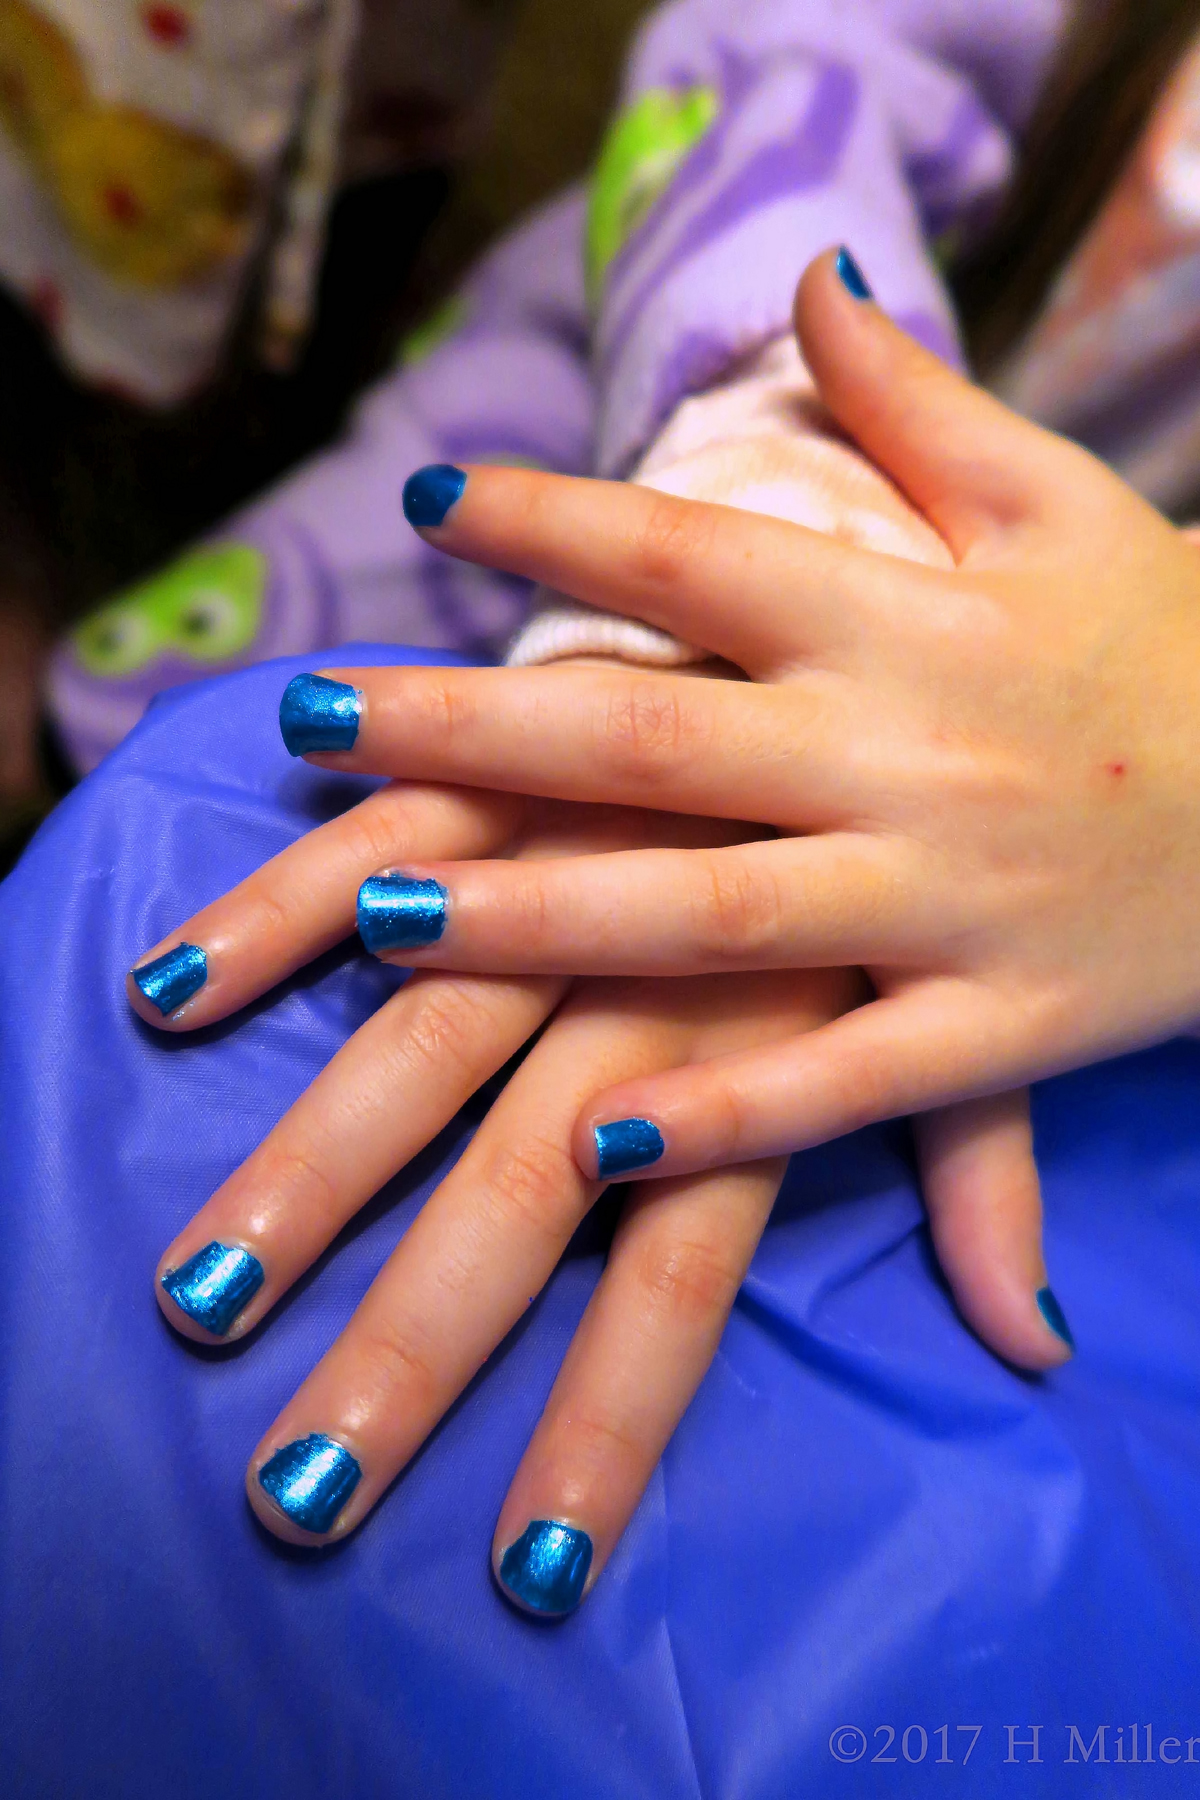 That Blue On The Girls Manicure Is Such A Perfect Shade! 